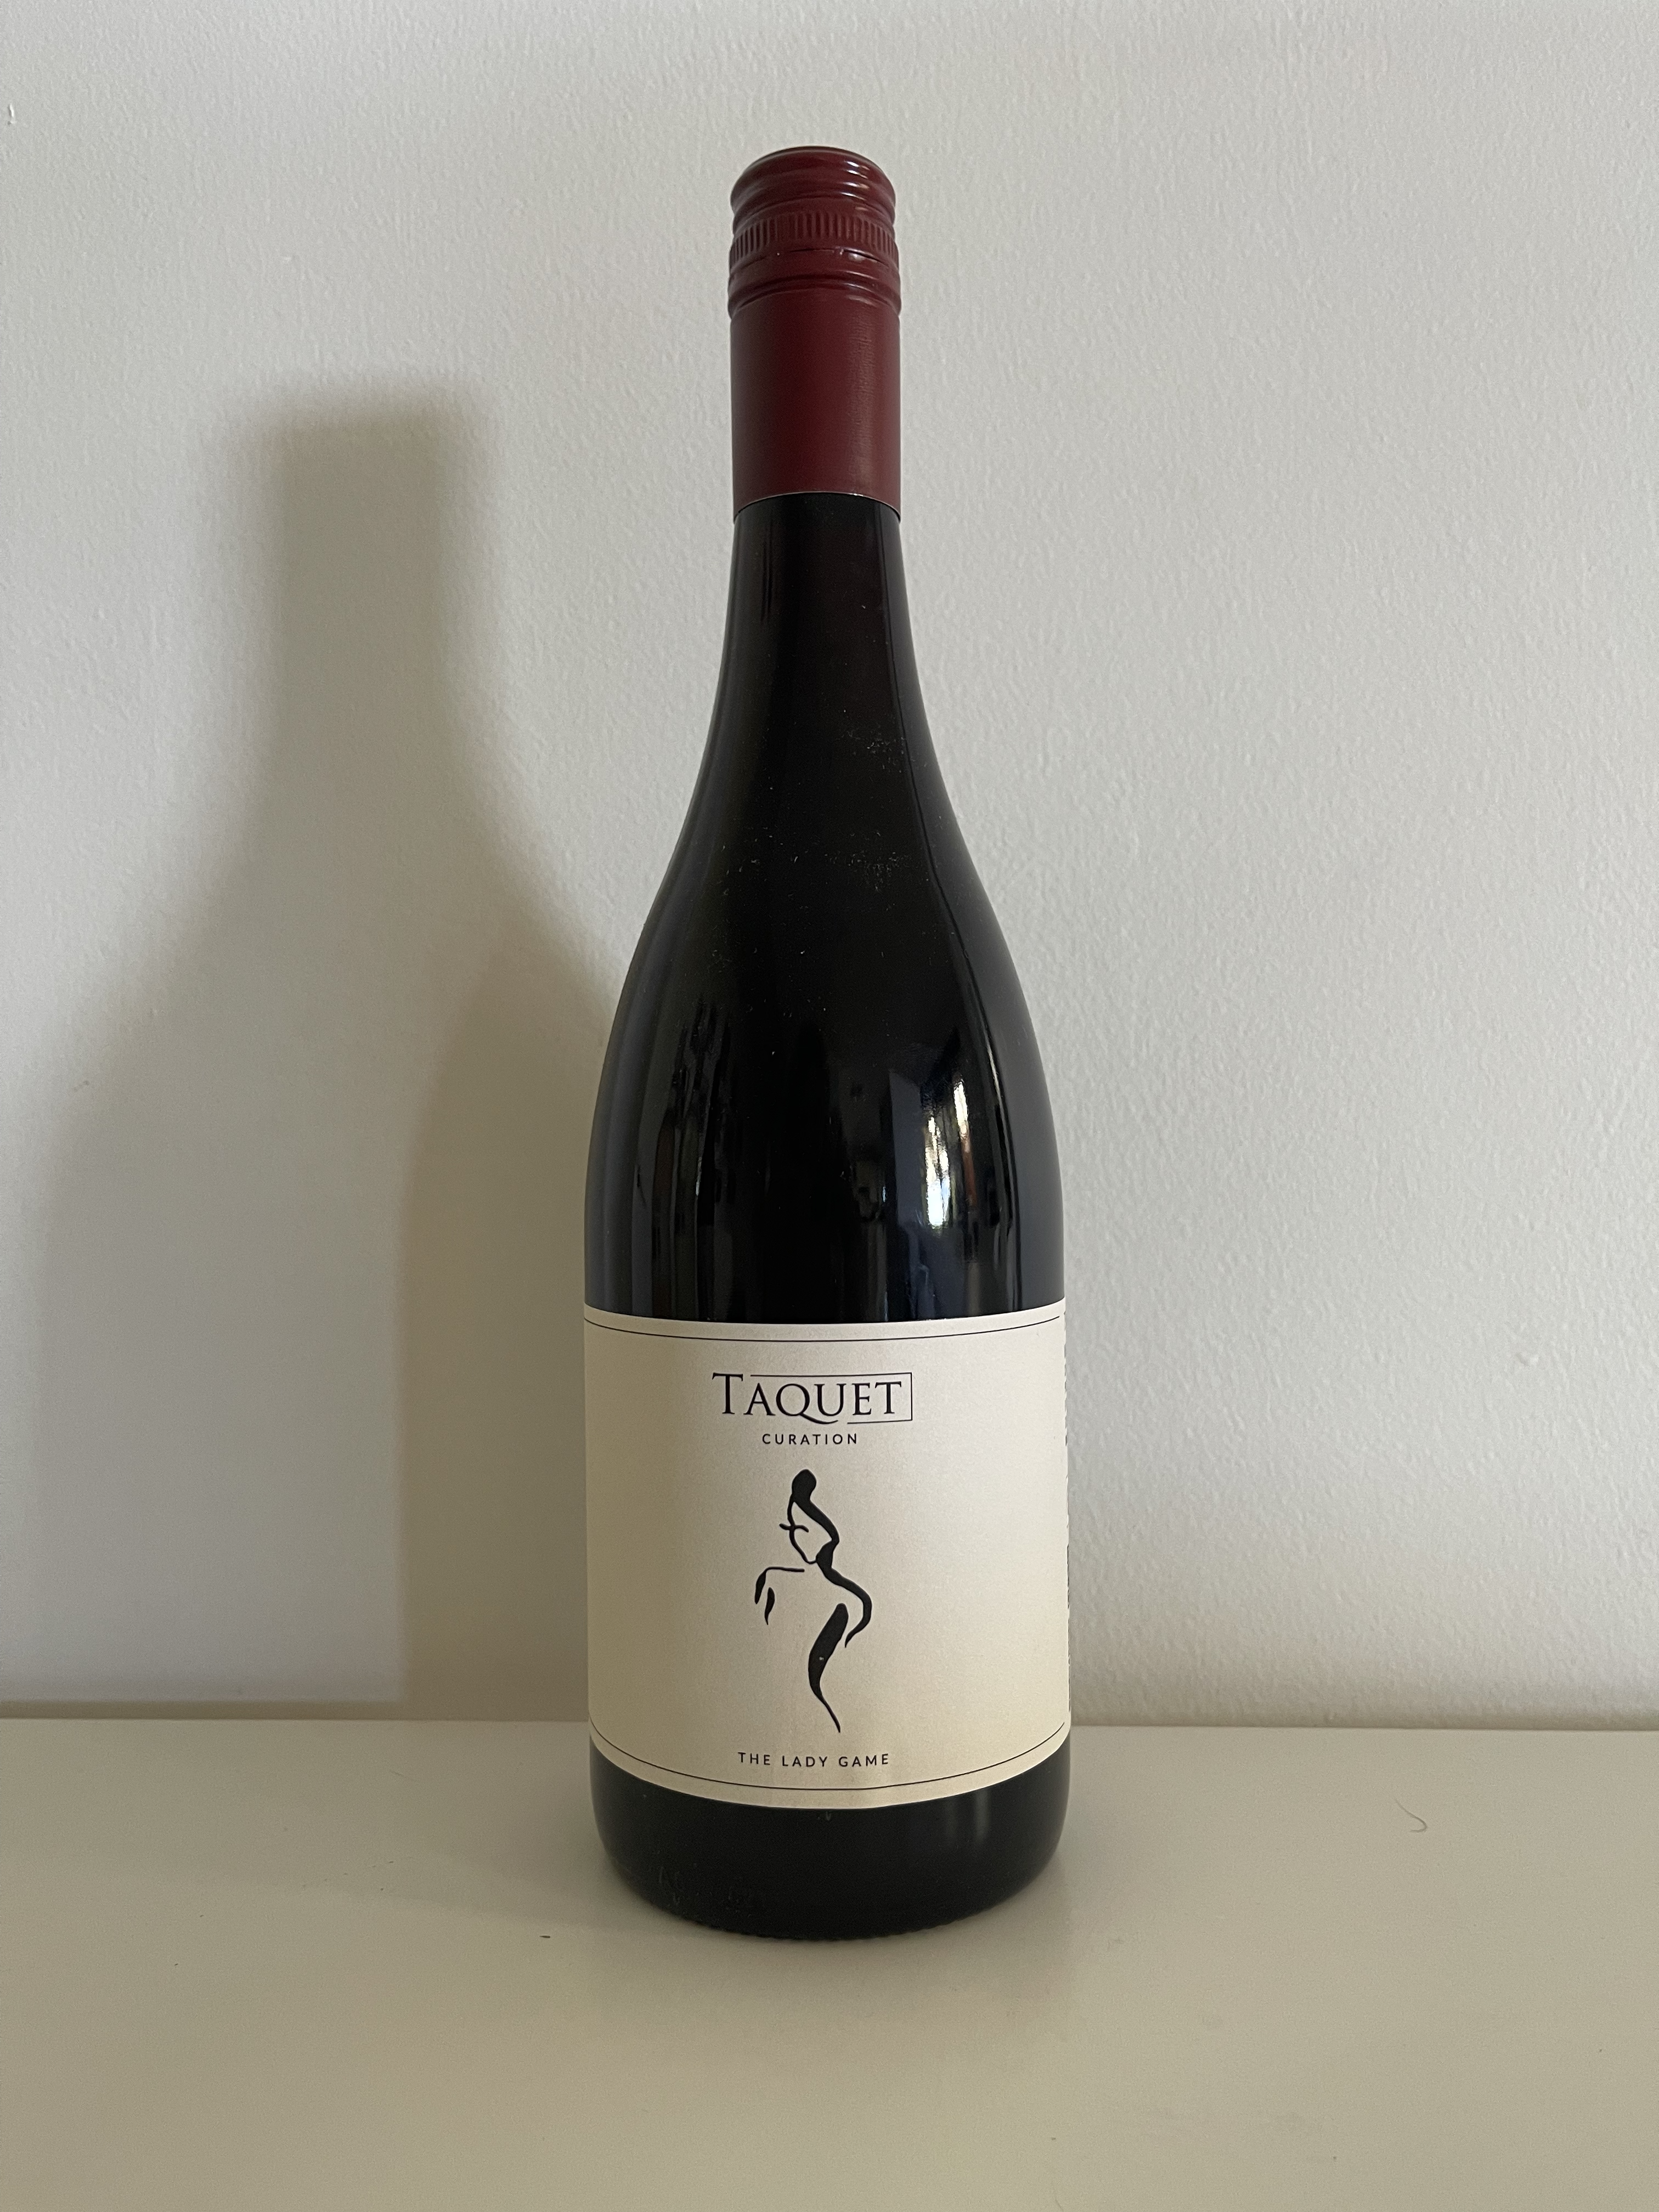 Taquet Curation wine for woman palate premium good ratio price quality small batch wine for good mood subscription purchase 6 bottles gift woman Australia